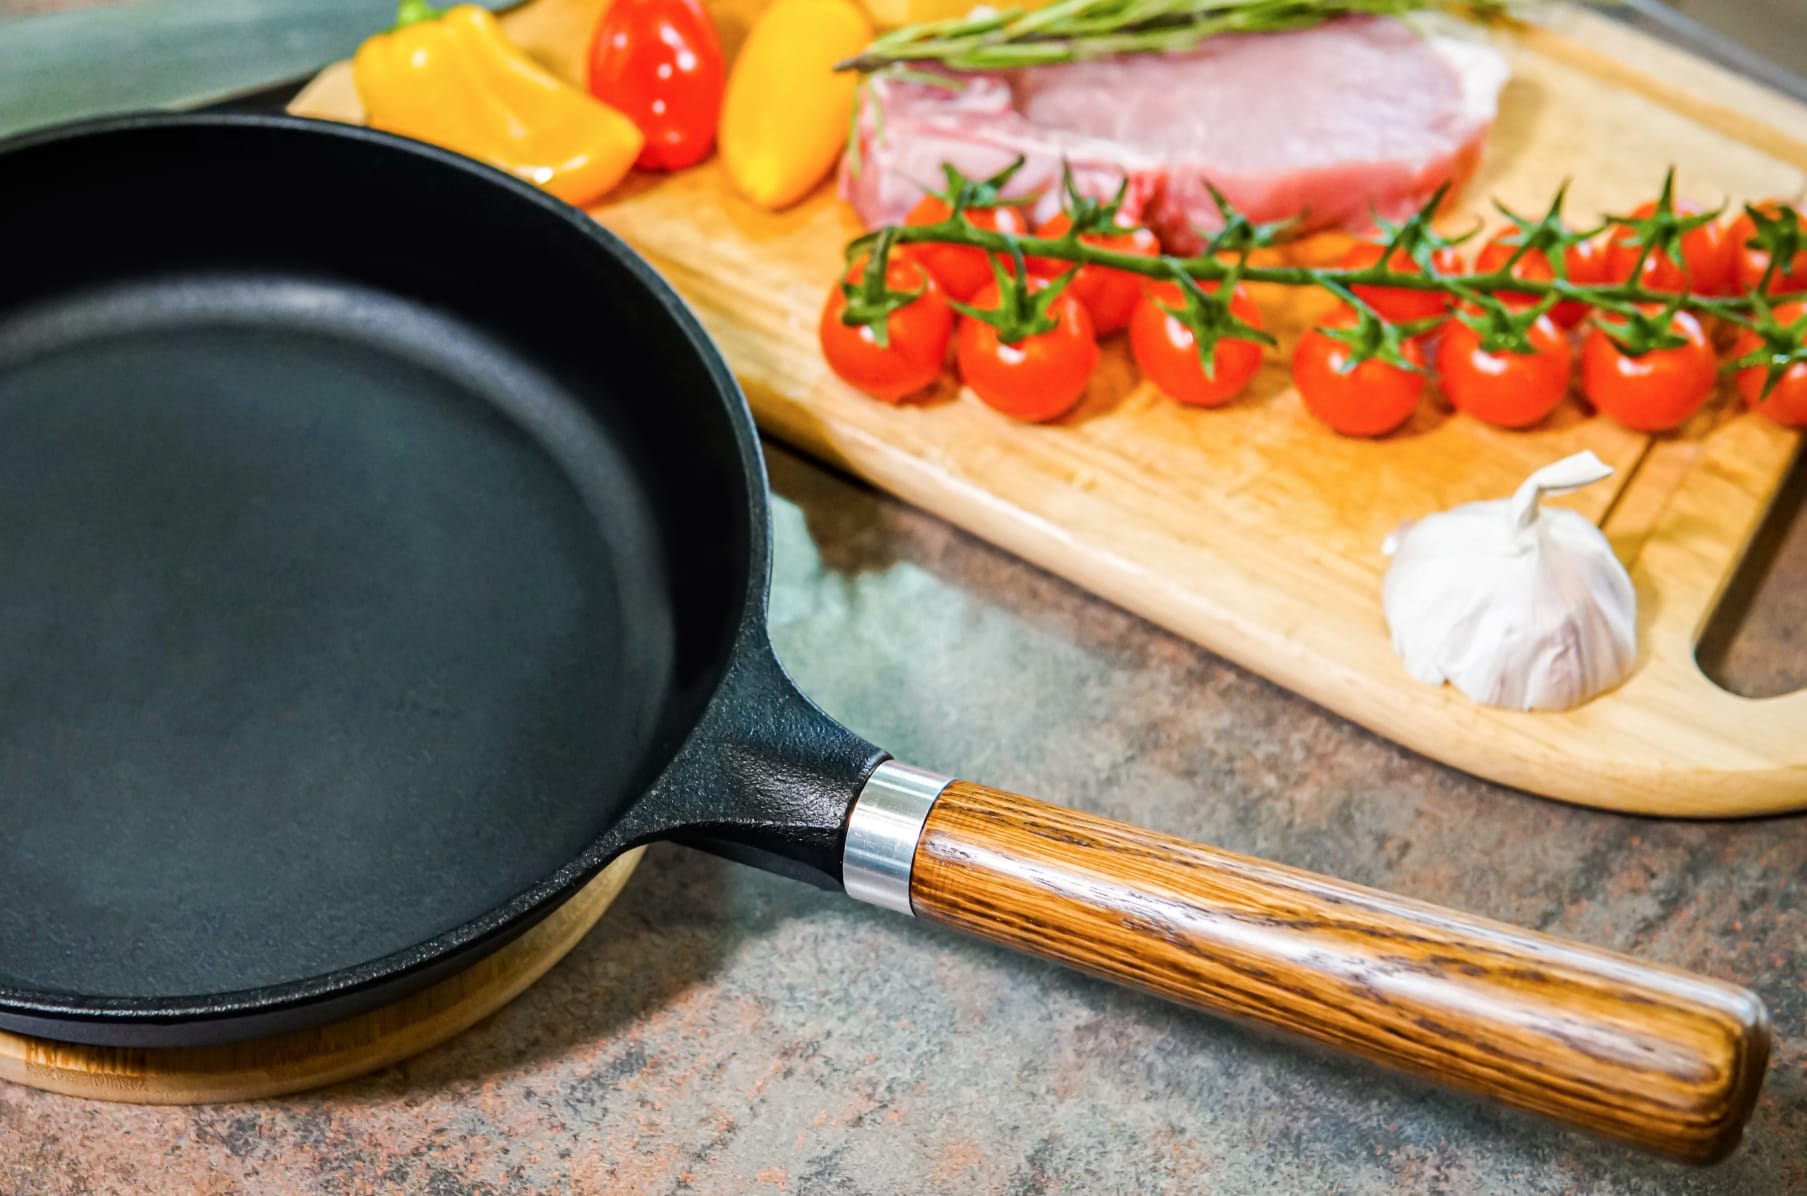 Cast Iron Skillet, Small Frying Pan with Detachable Wooden Handle